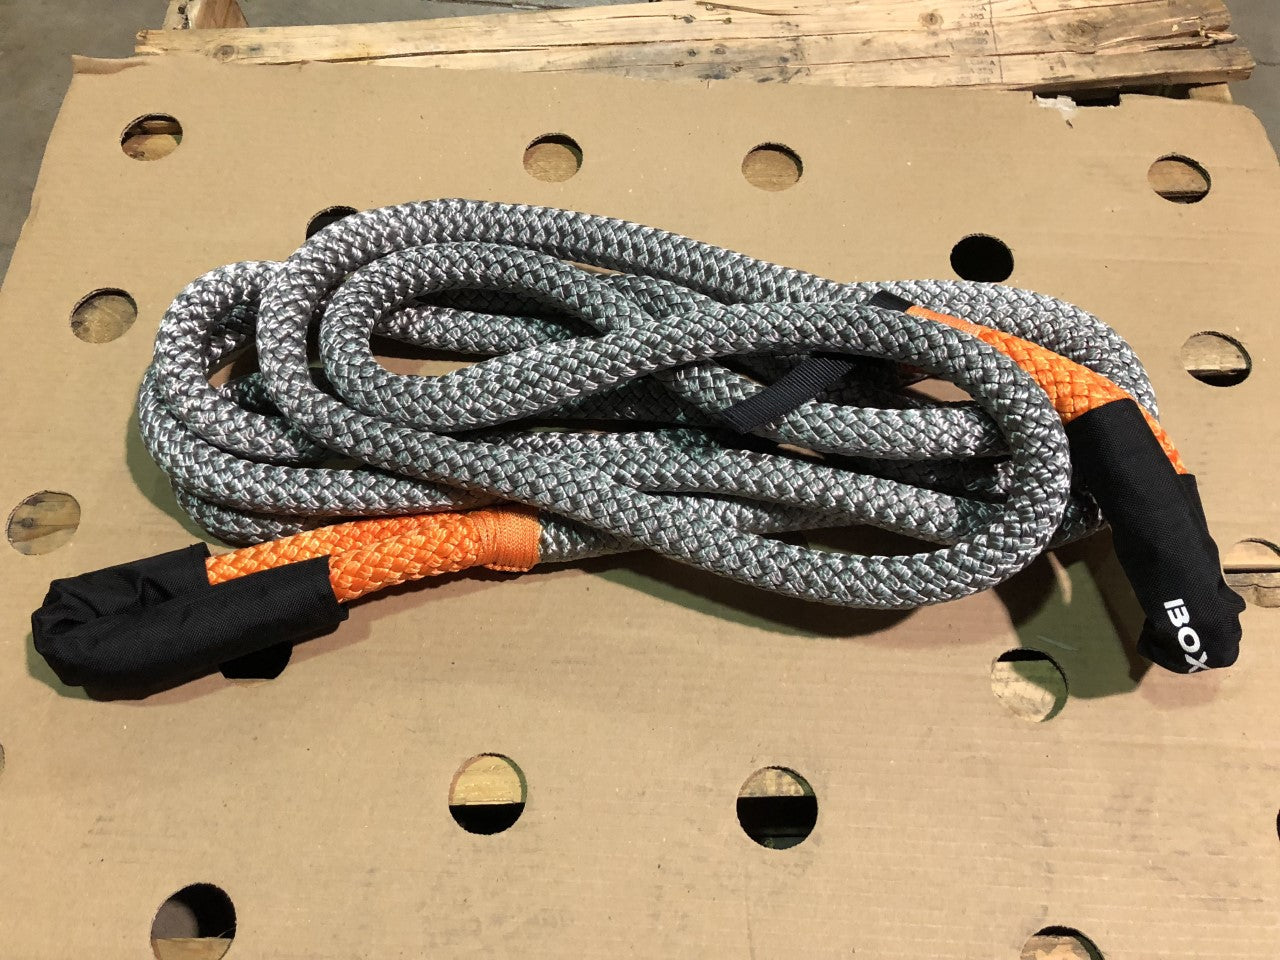 Boxer 1" x 30' 29300 Lb. MBS Kinetic Recovery Rope #77412